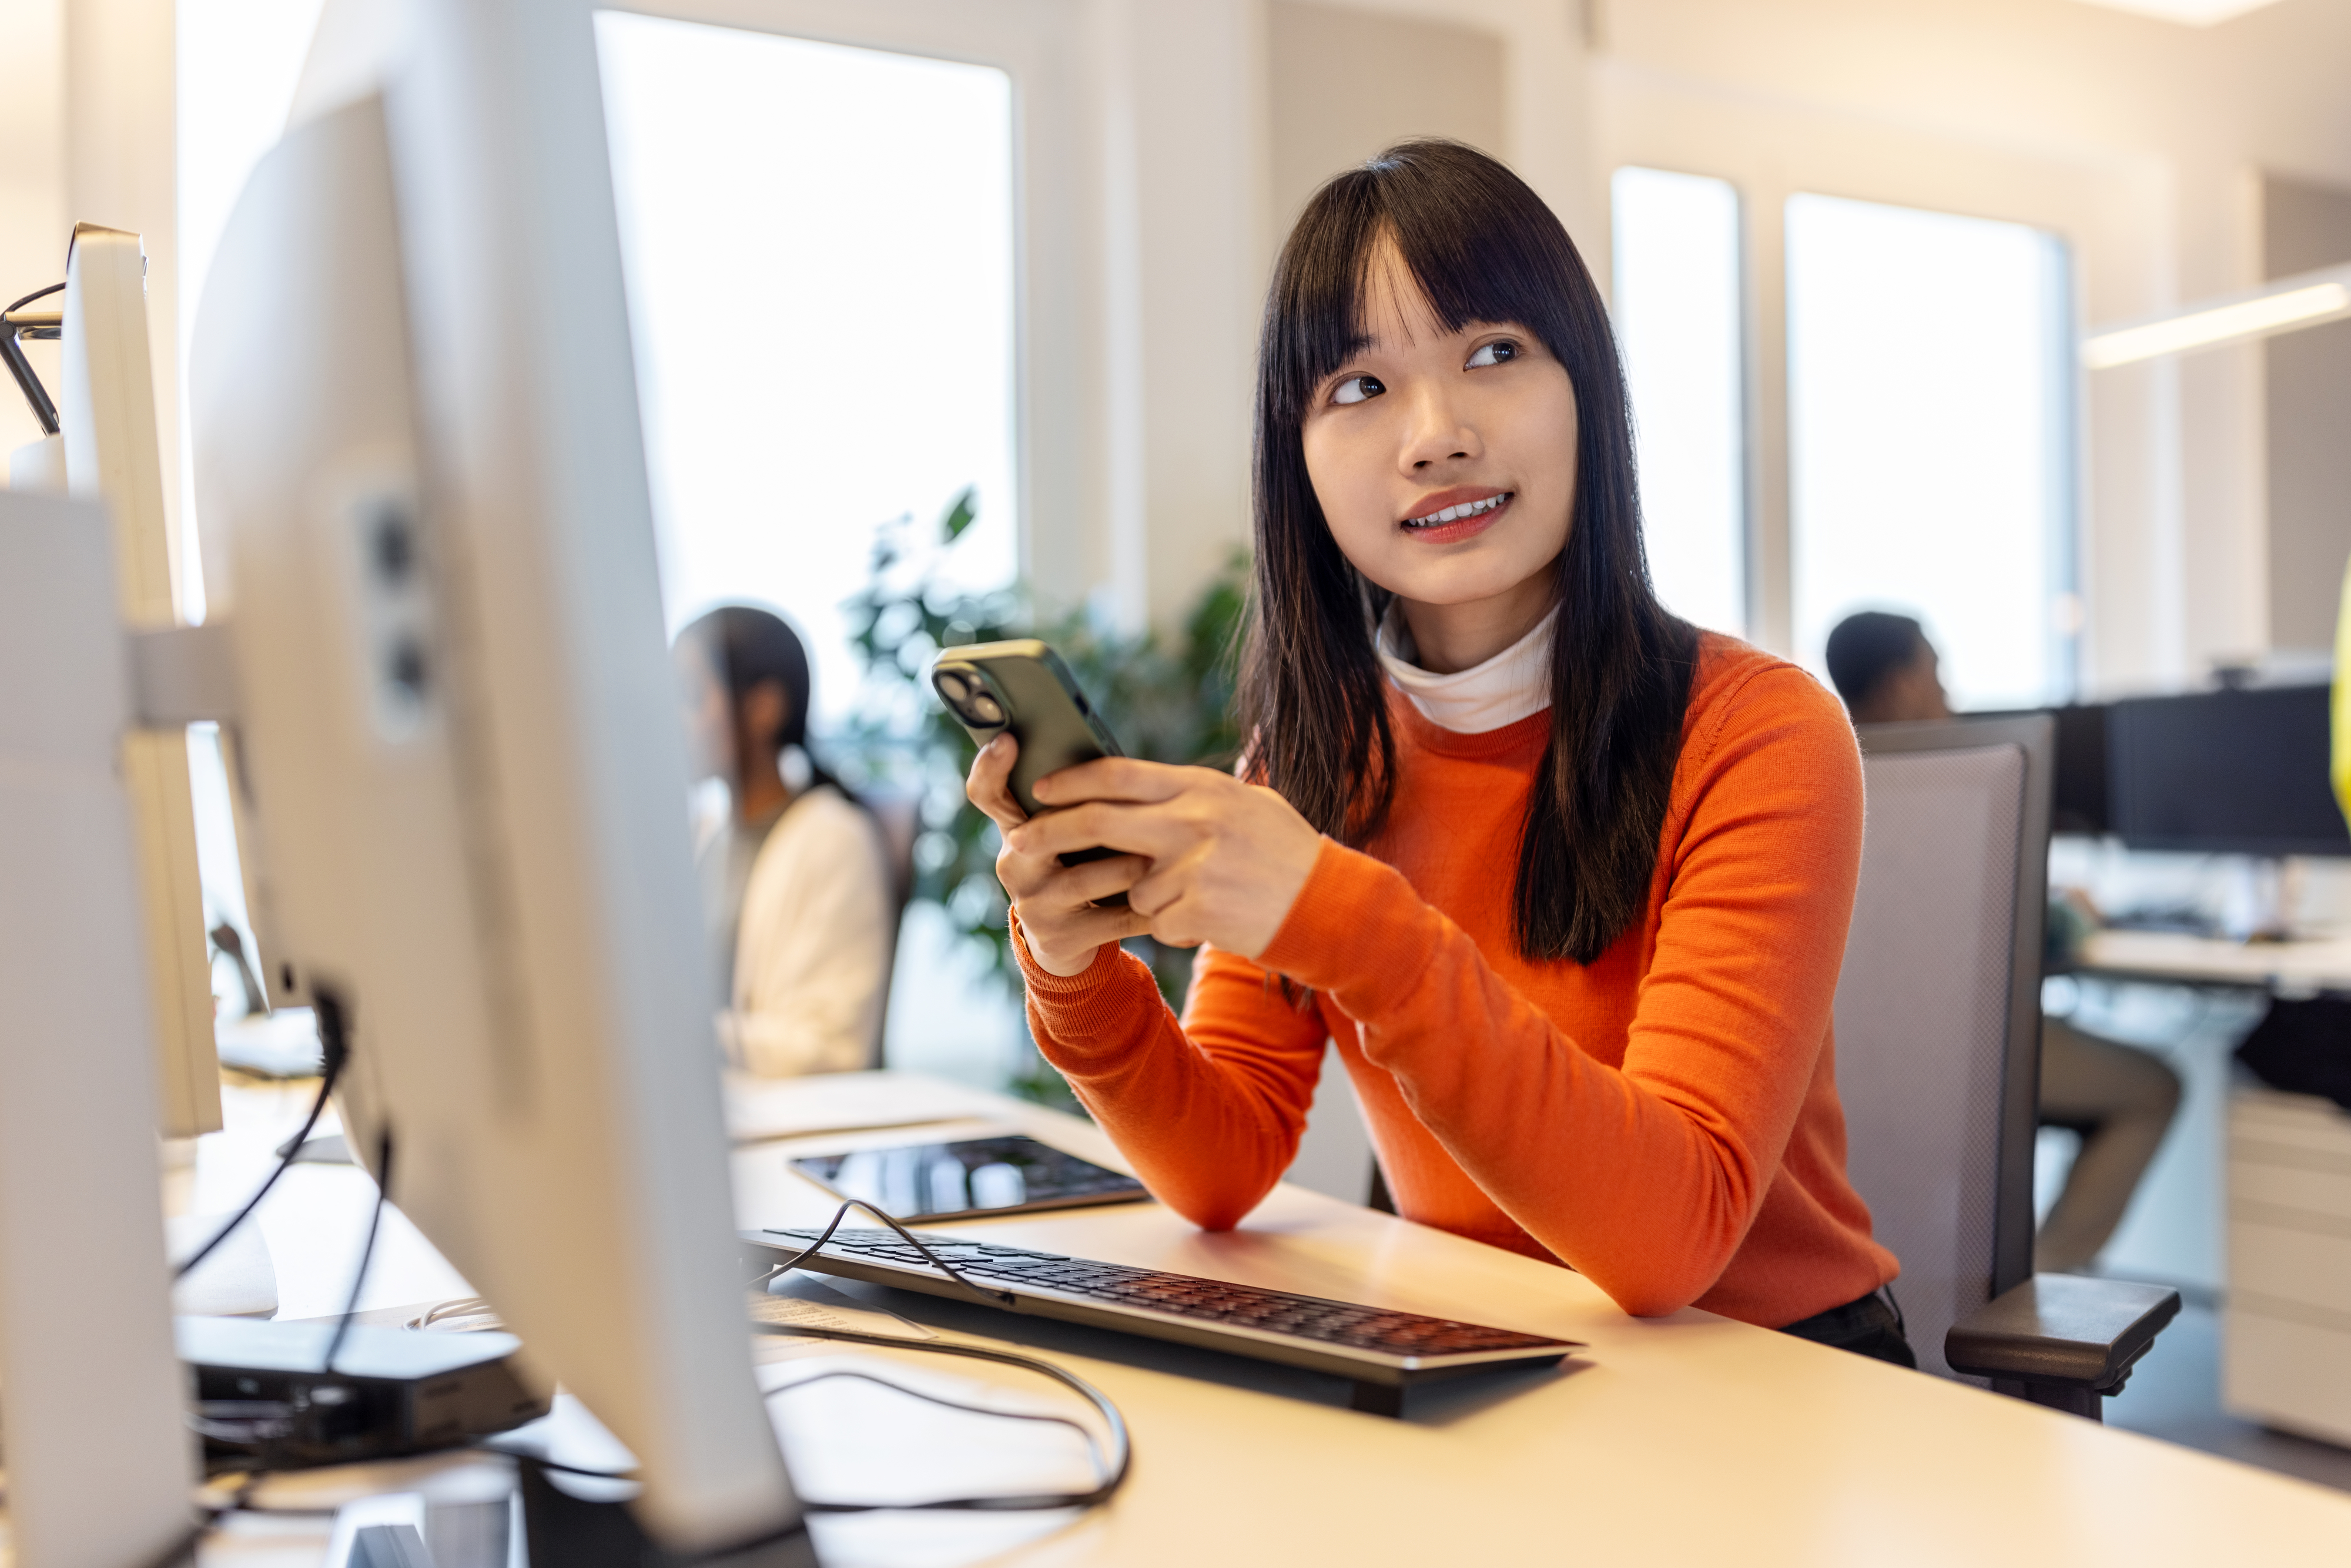 Woman in office using phone, looking in disbelief, colleagues working in background